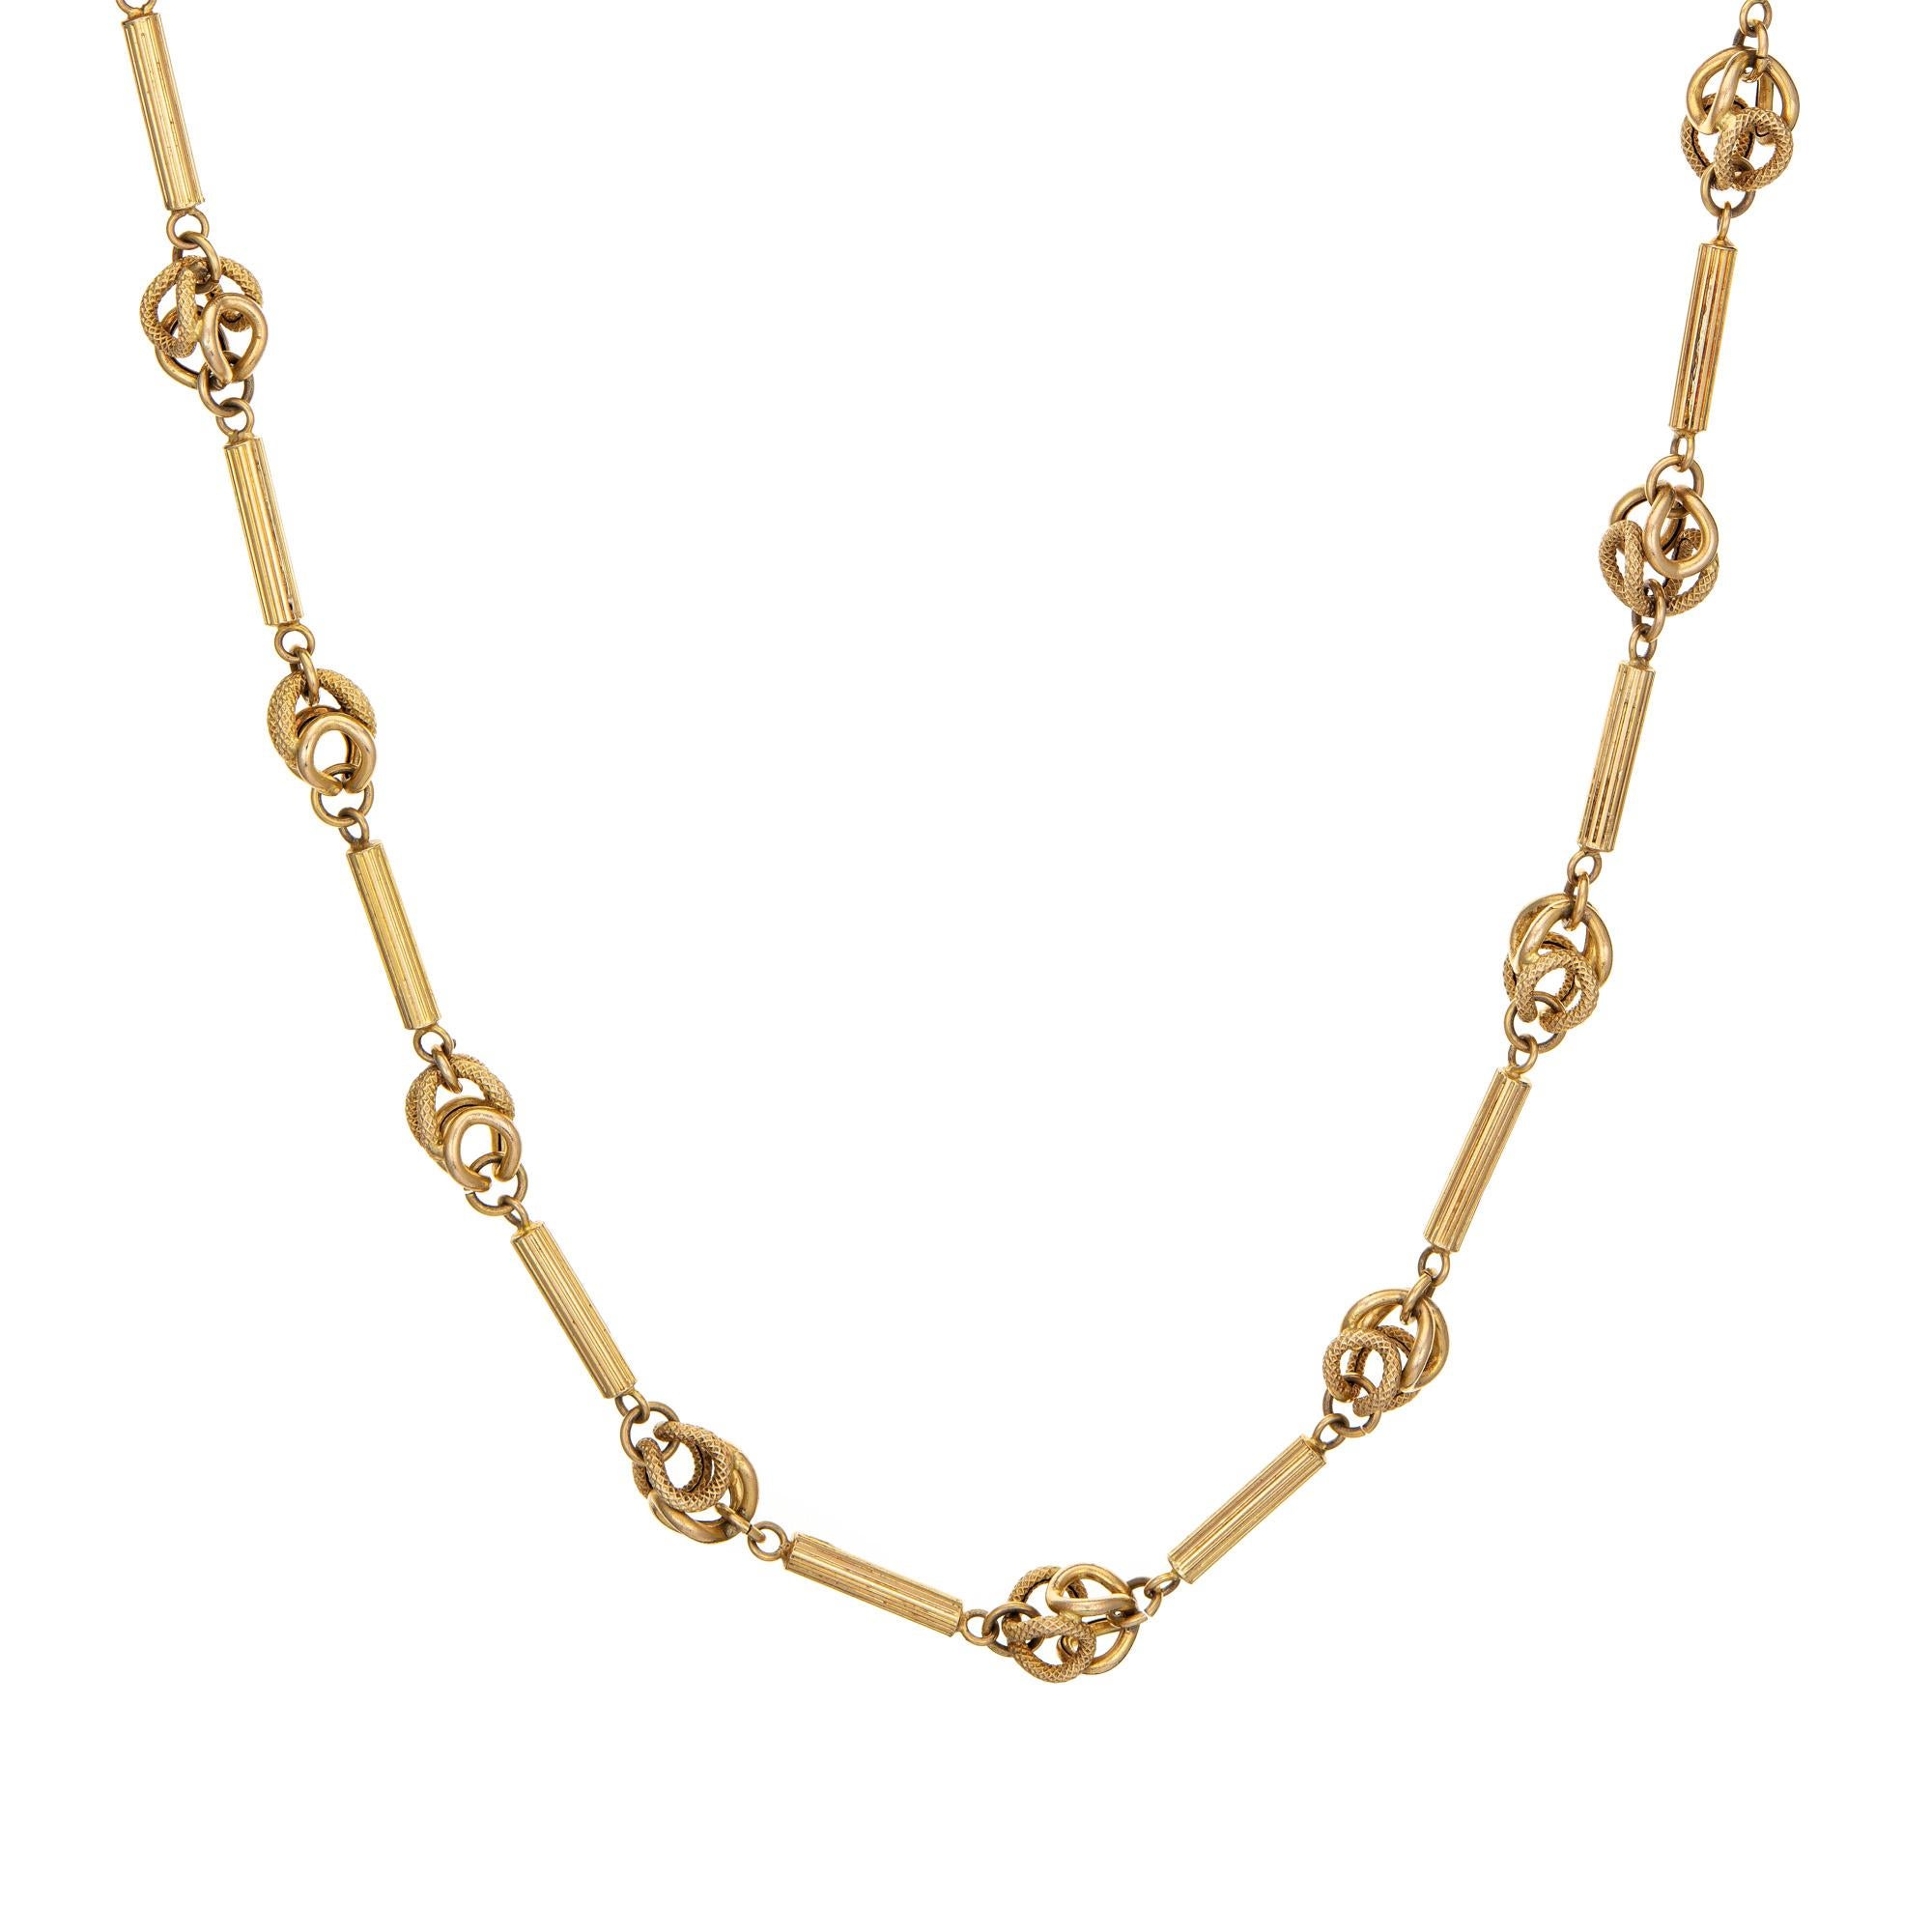 Fancy Link Necklace Vintage 14k Yellow Gold 26